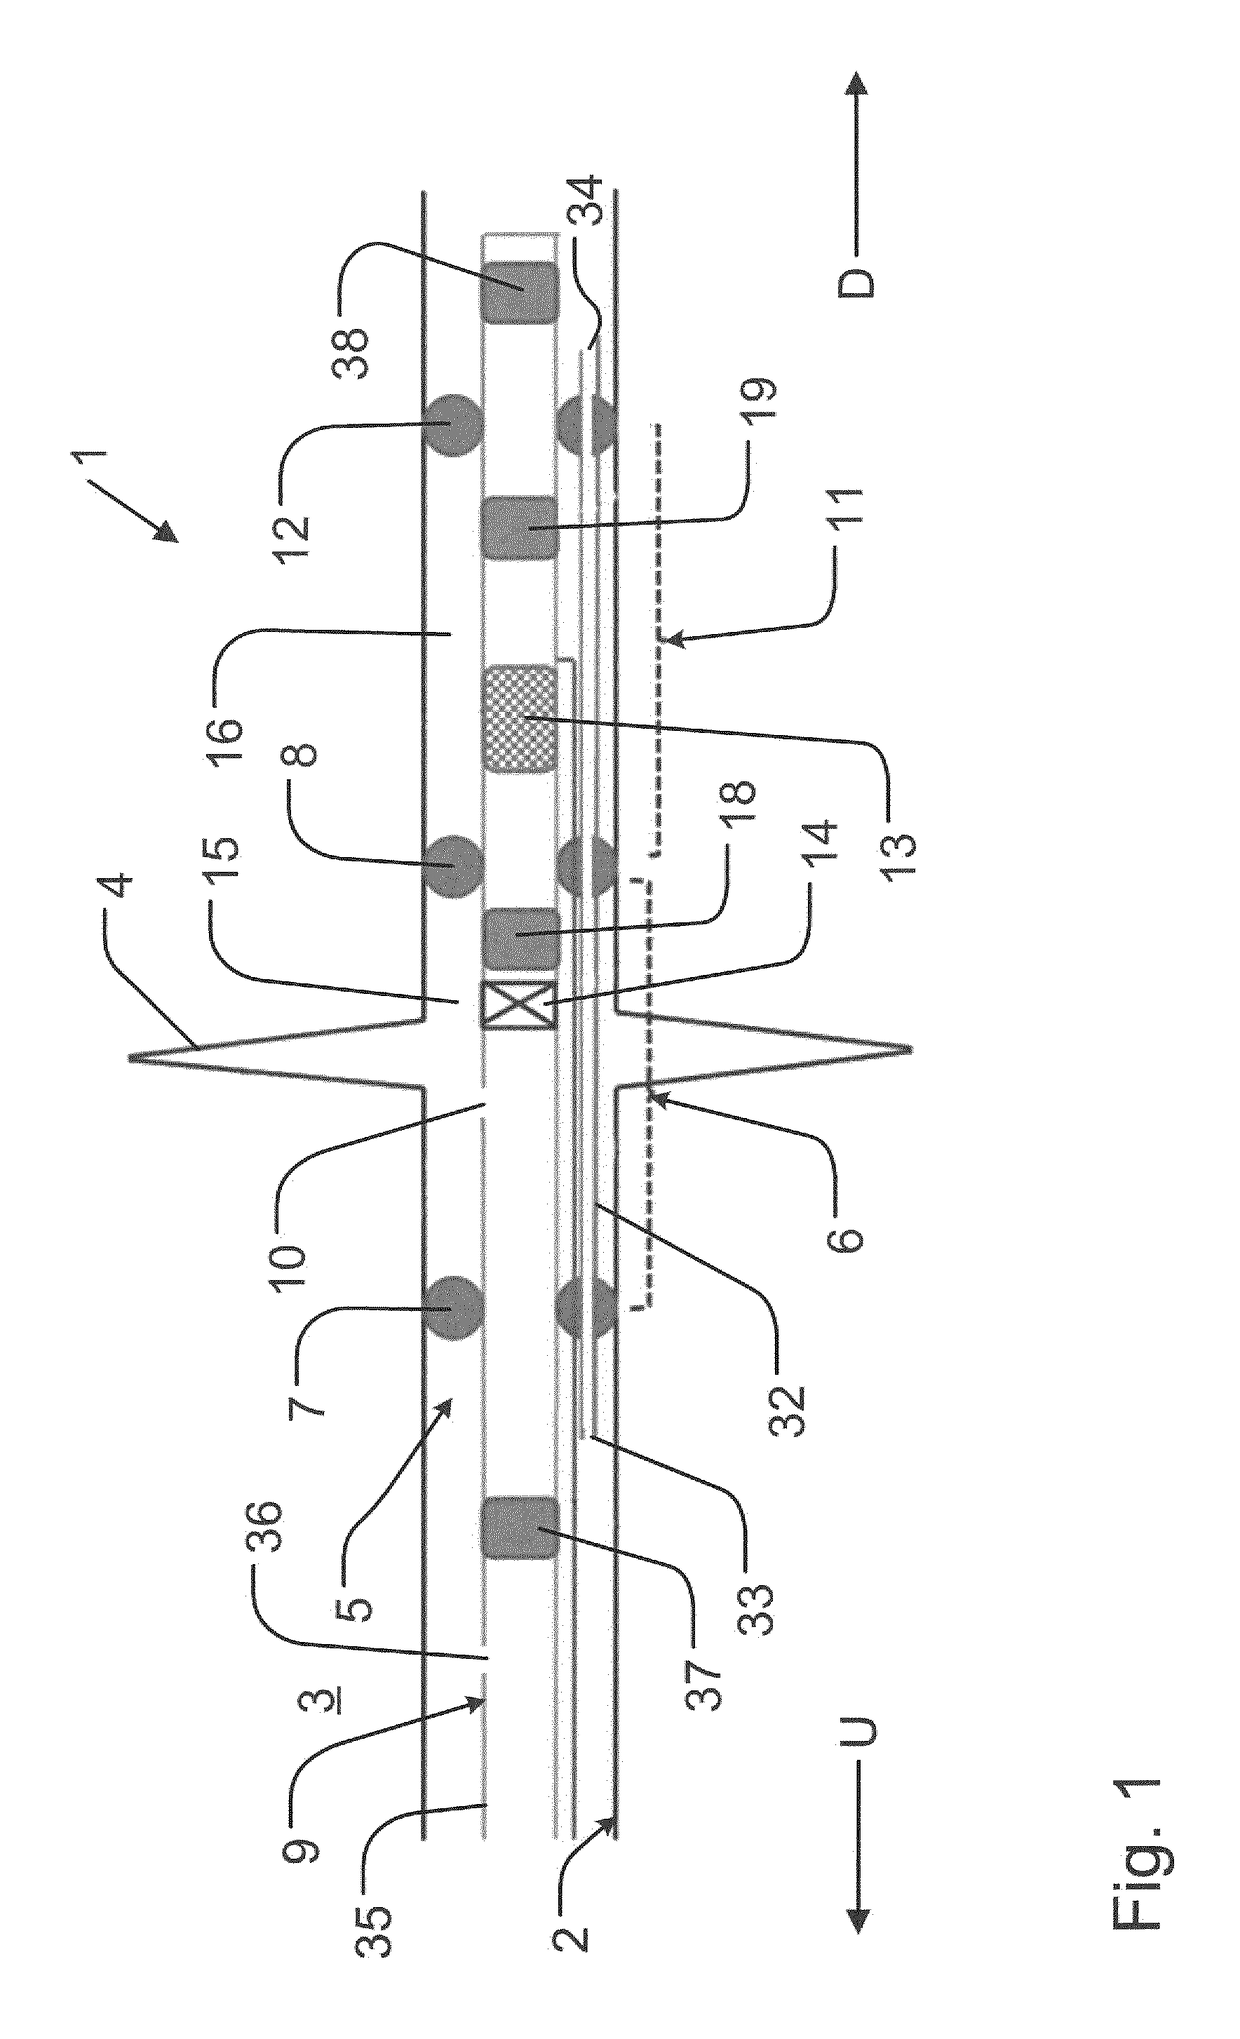 Sealing device and method for sealing fractures or leaks in wall or formation surrounding tube-shaped channel